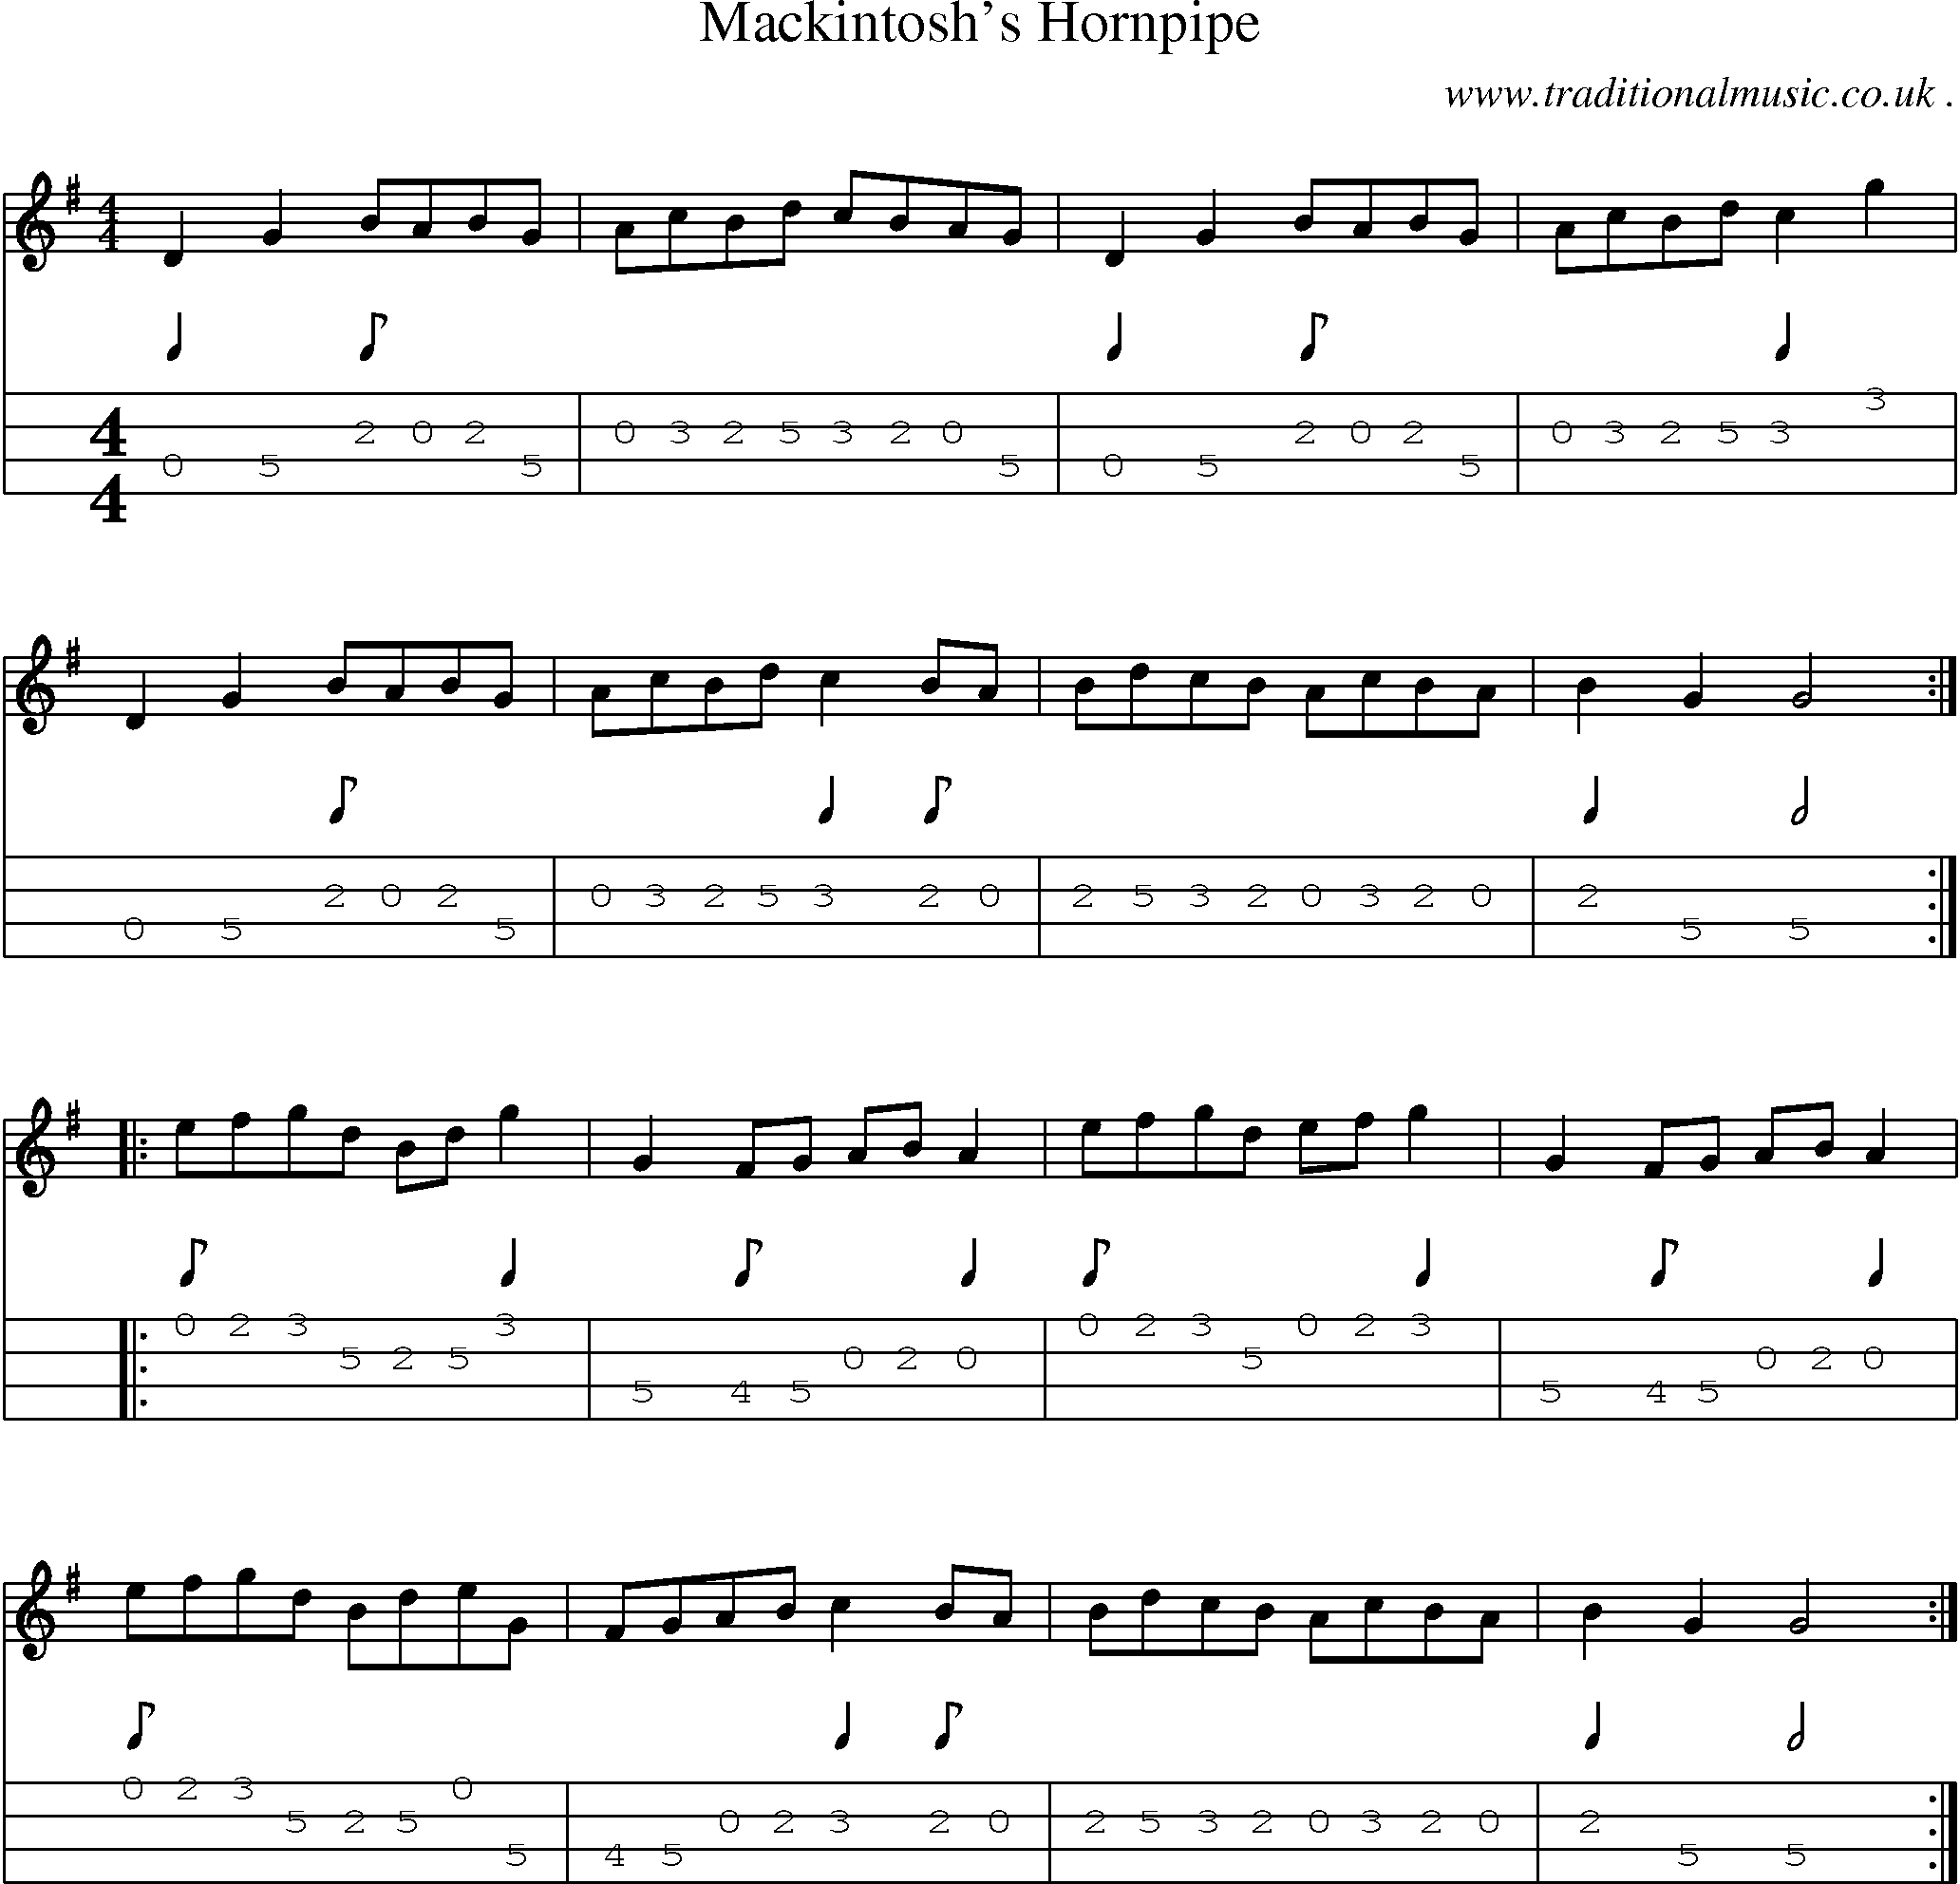 Sheet-Music and Mandolin Tabs for Mackintoshs Hornpipe